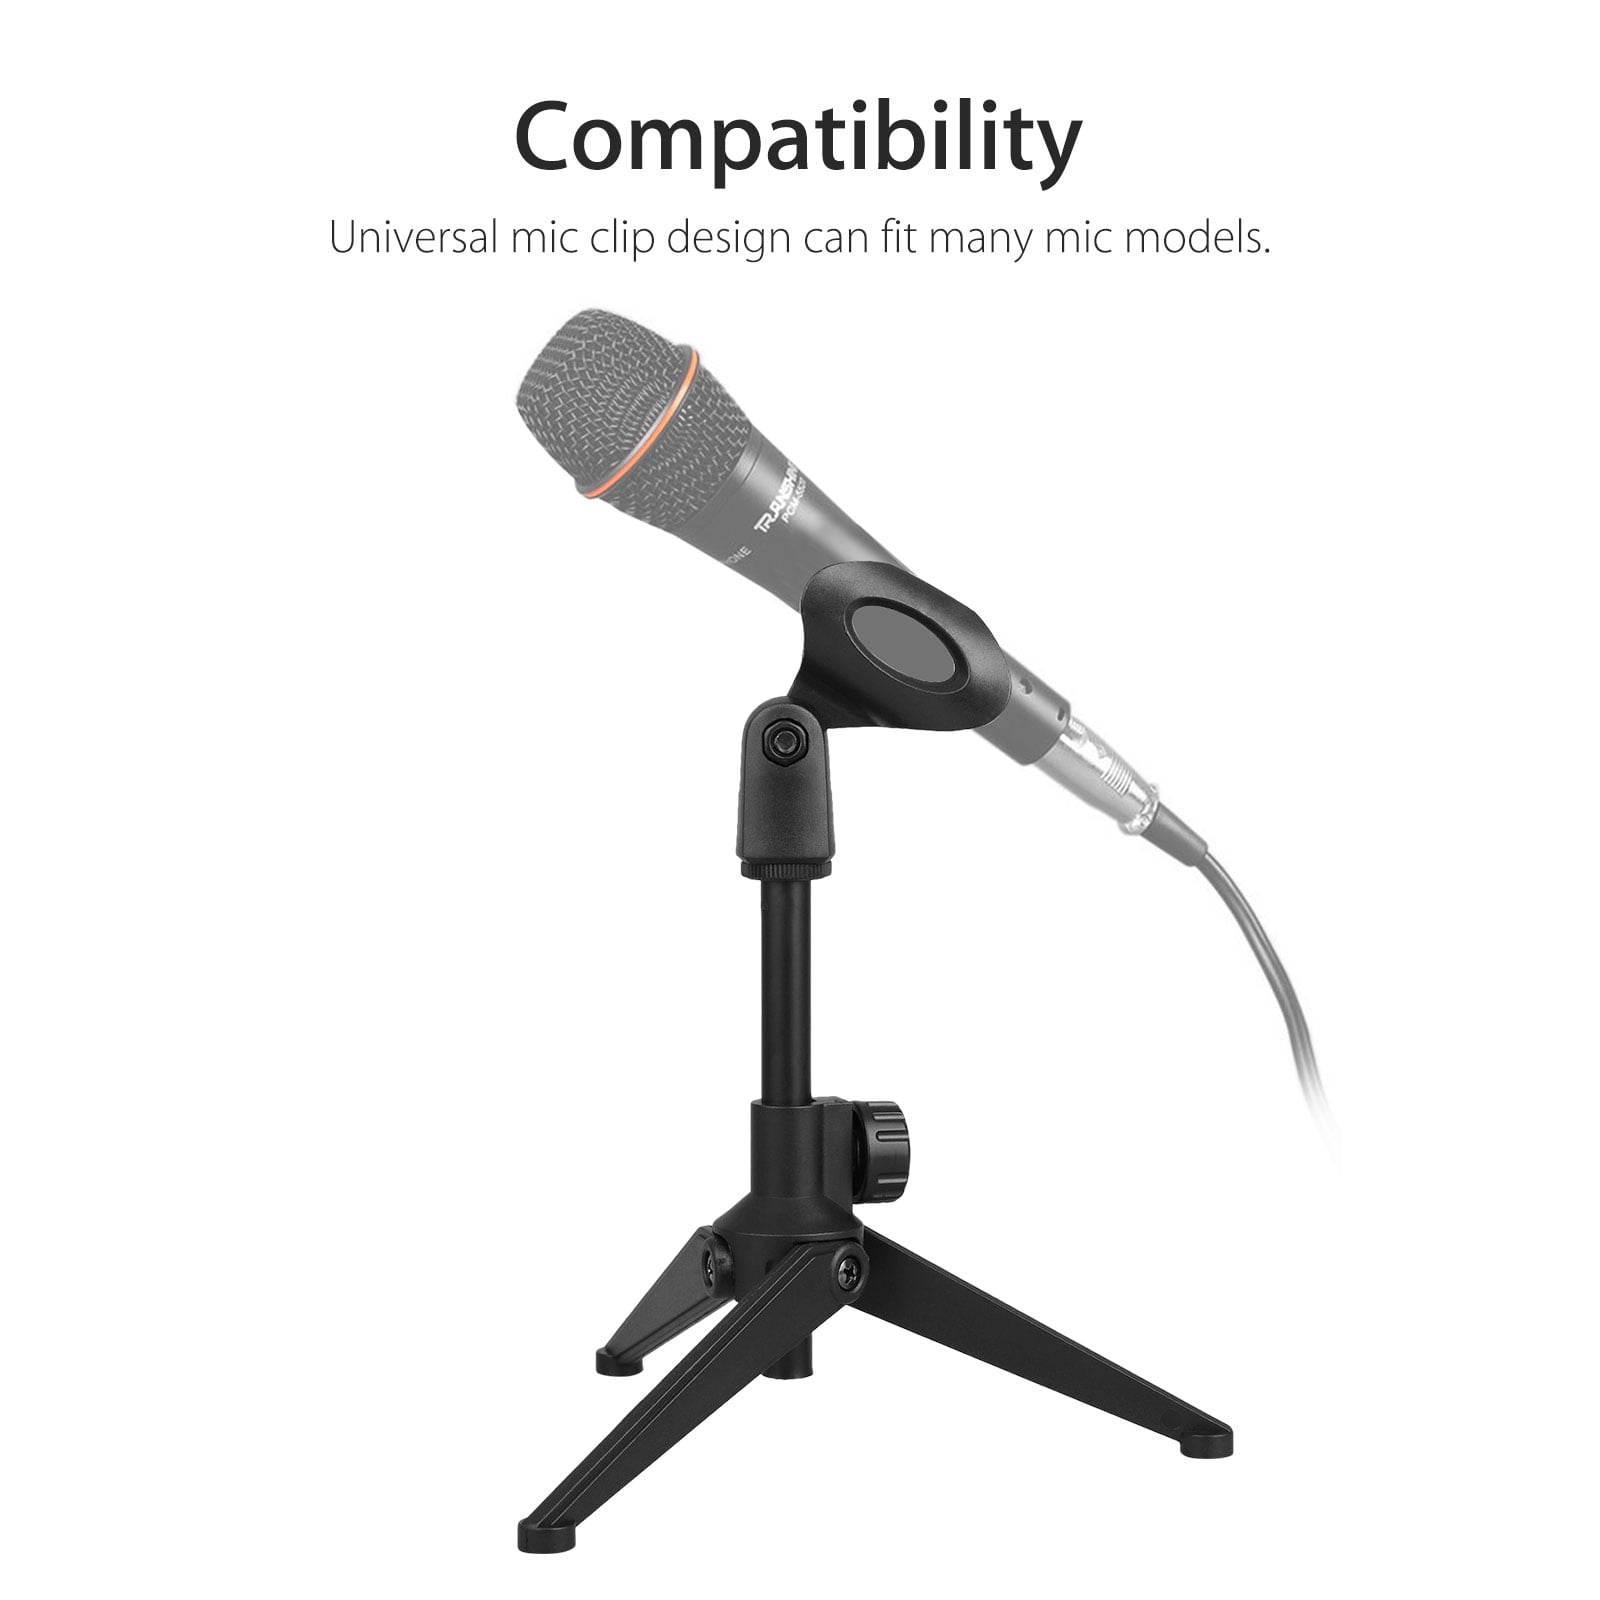 Universal Adjustable Desk Microphone Stand Portable Foldable Tripod MIC Tabletop Stand with Small Plastic Microphone Clip Such as Sm57 Sm58 Sm86 Sm87 